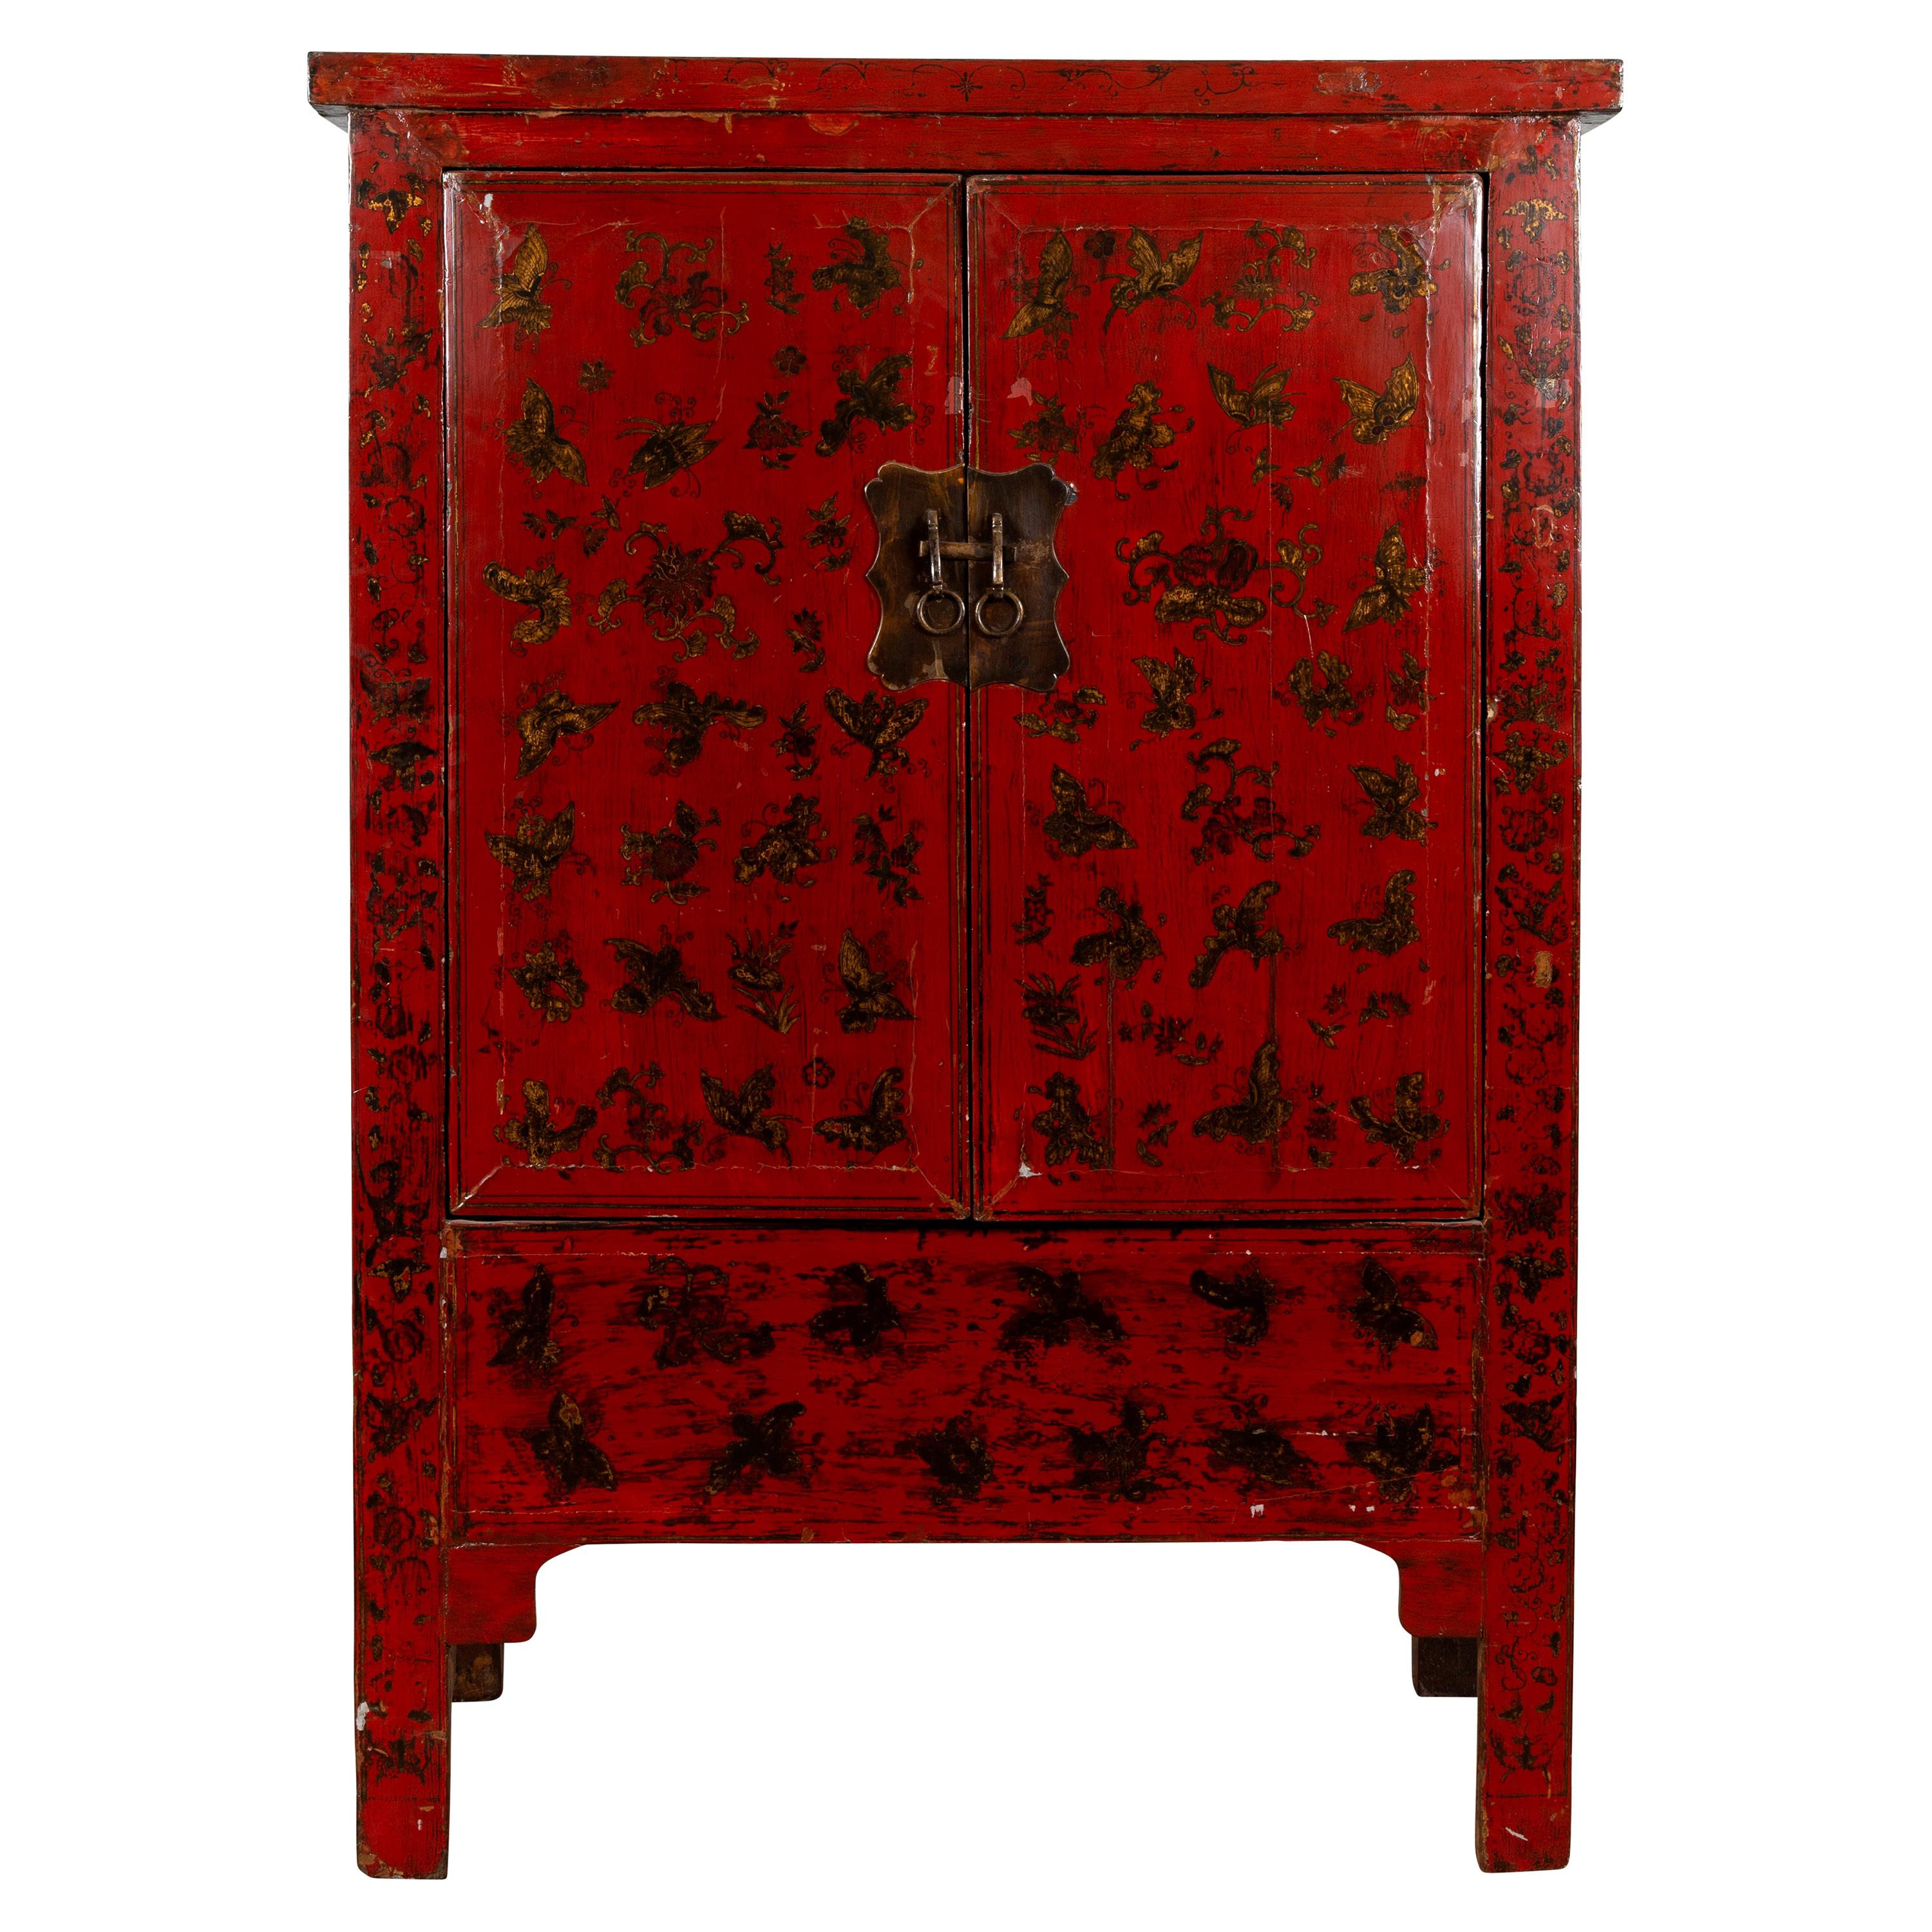 Chinese Red Lacquered Qing Dynasty 19th Century Cabinet with Chinoiserie Décor